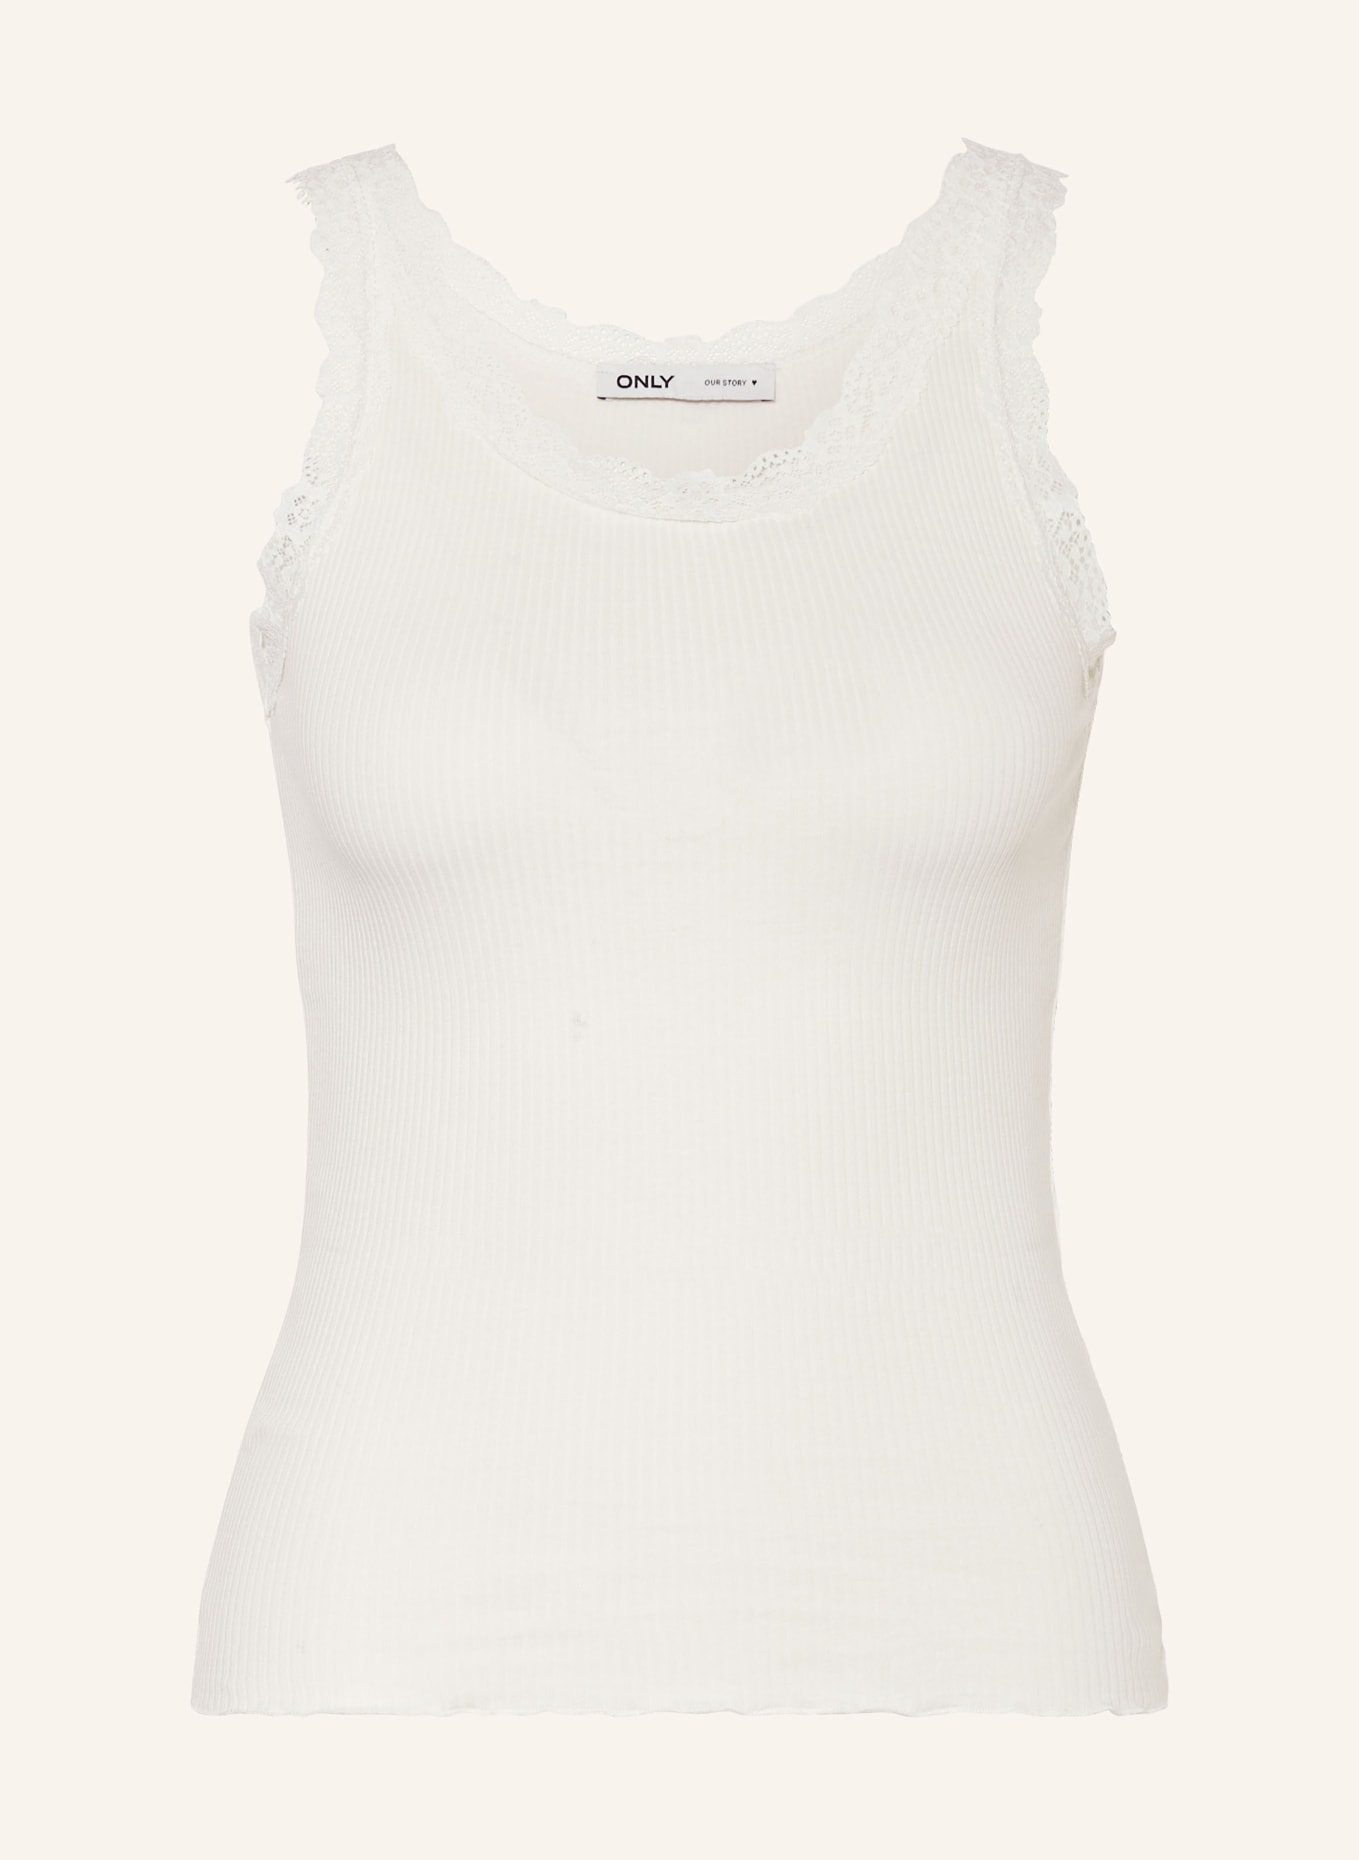 ONLY Top with lace, Color: WHITE (Image 1)